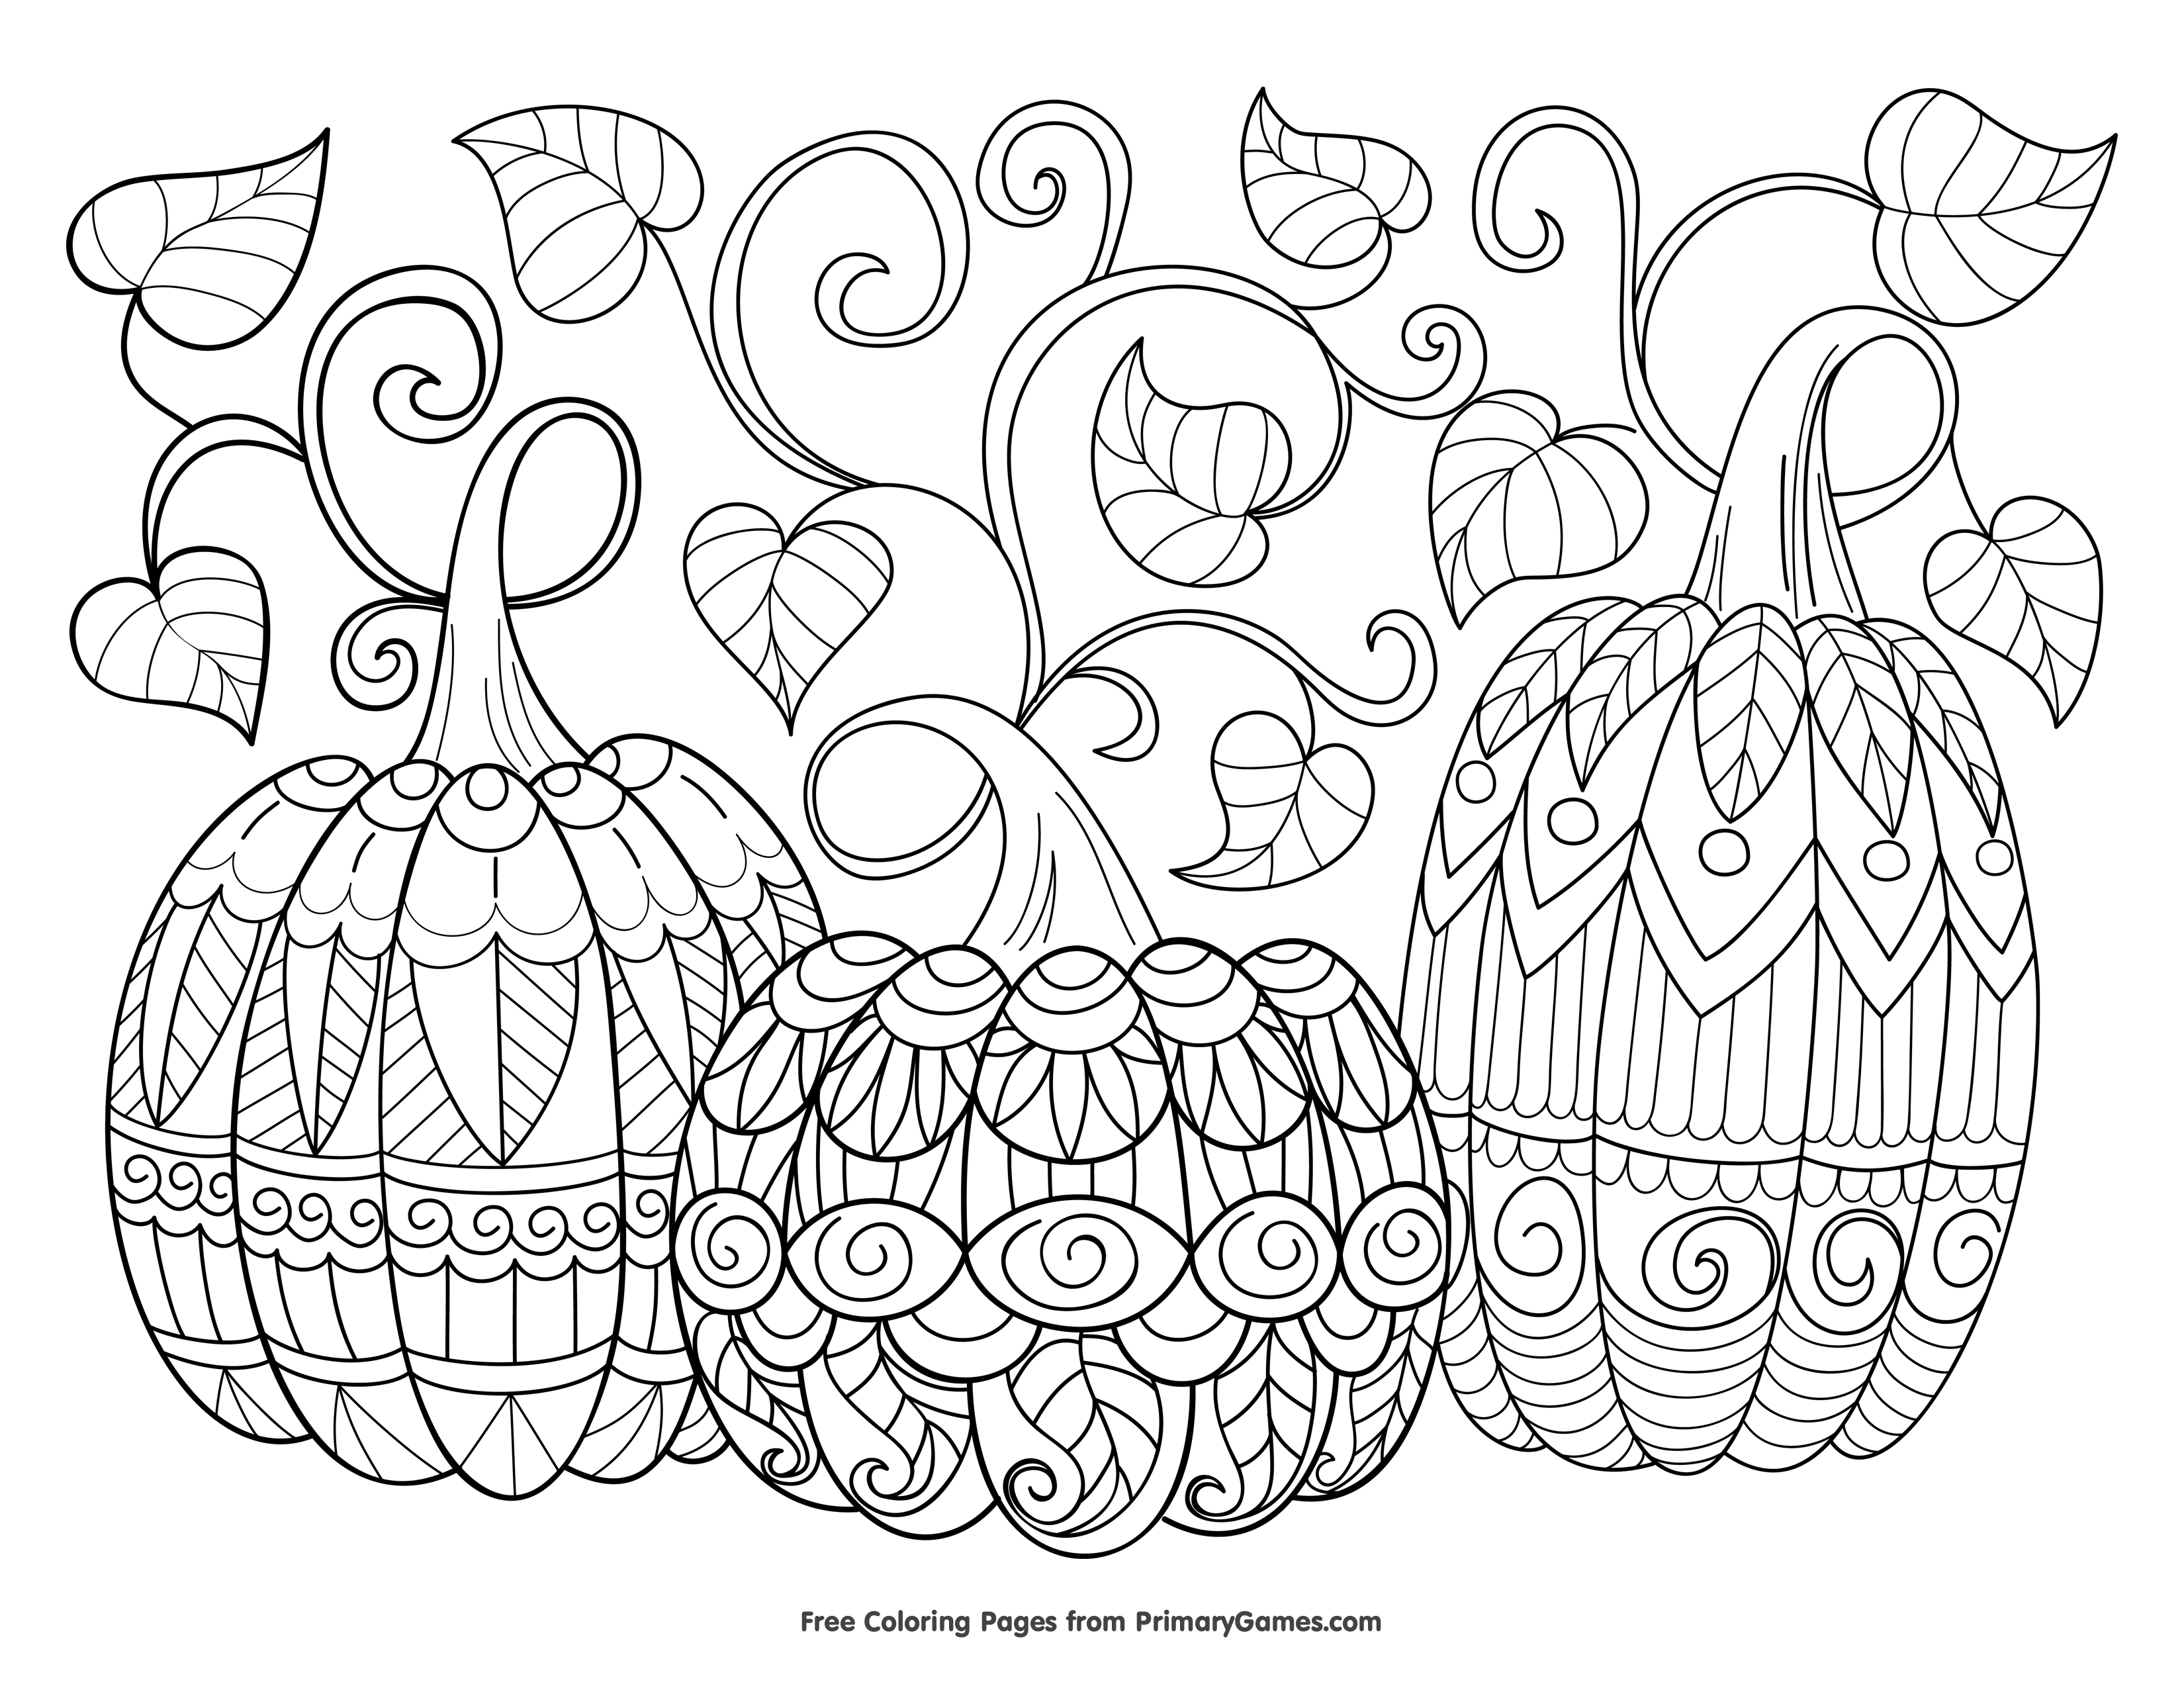 FREE Halloween Coloring Pages for Adults Kids